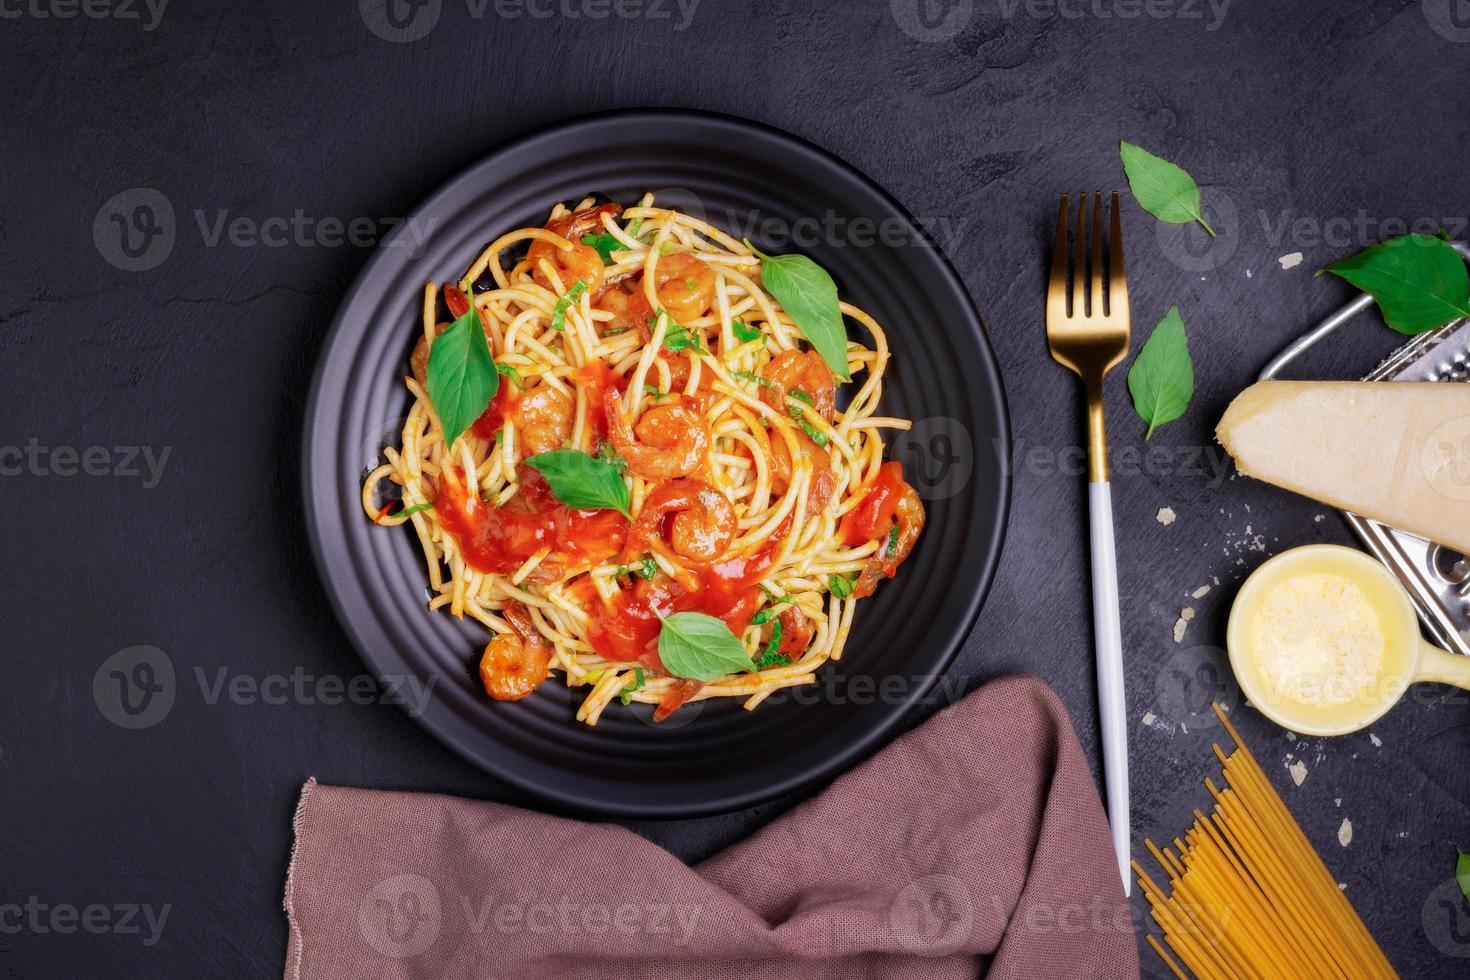 Delicious spaghetti pasta with prawns and cheese served on a black plate. With vegetables, Italian tomato sauce, and spices arranged on a wooden table, black background, top view photo